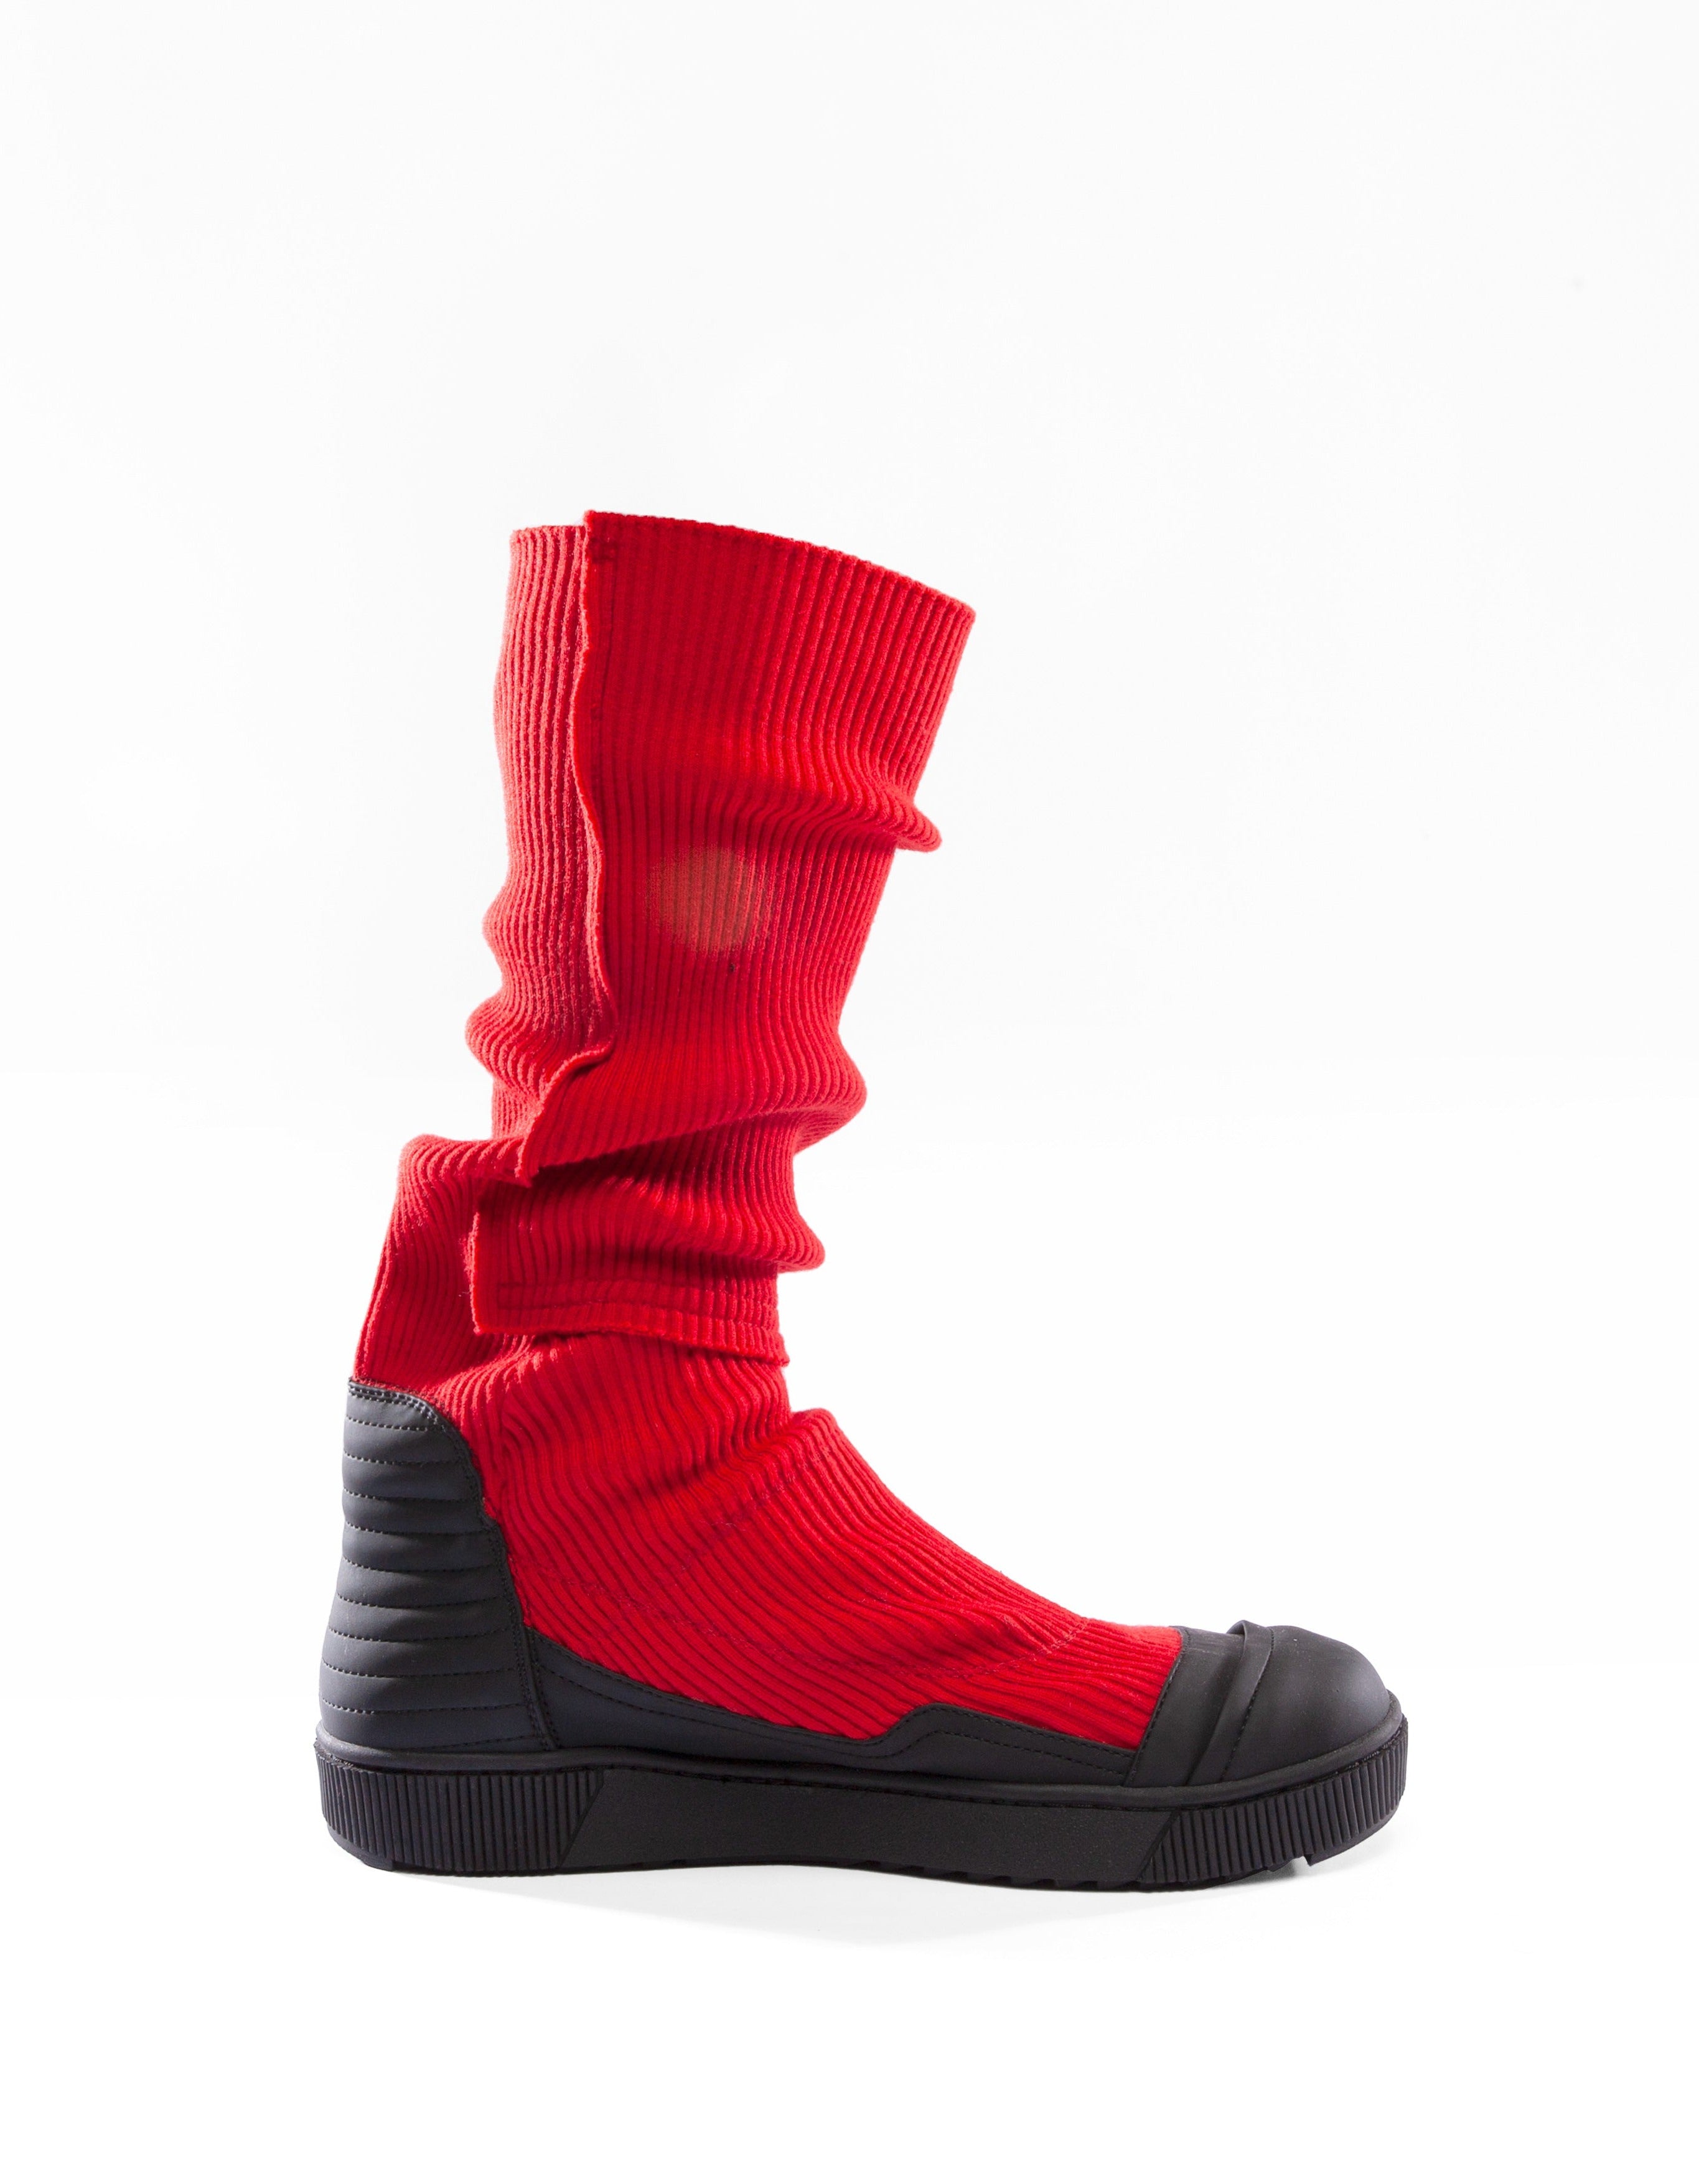 RIPSTIEFEL ROT M